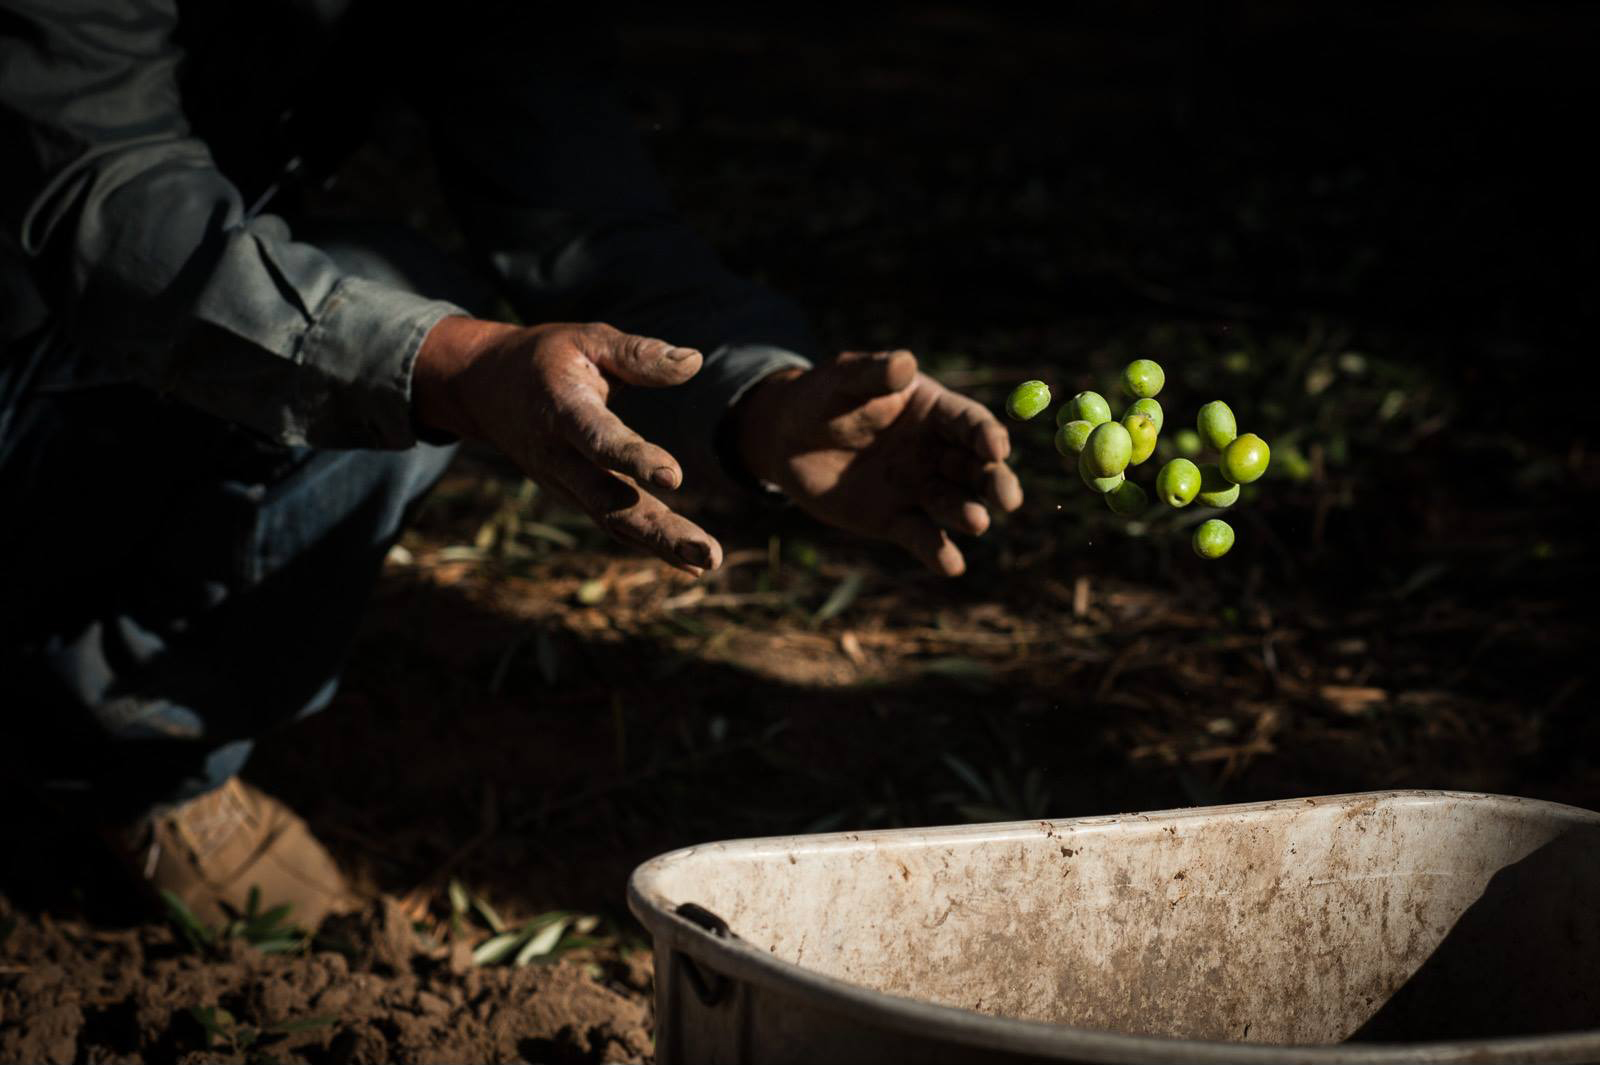 Freshly harvested olives tossed into a bucket